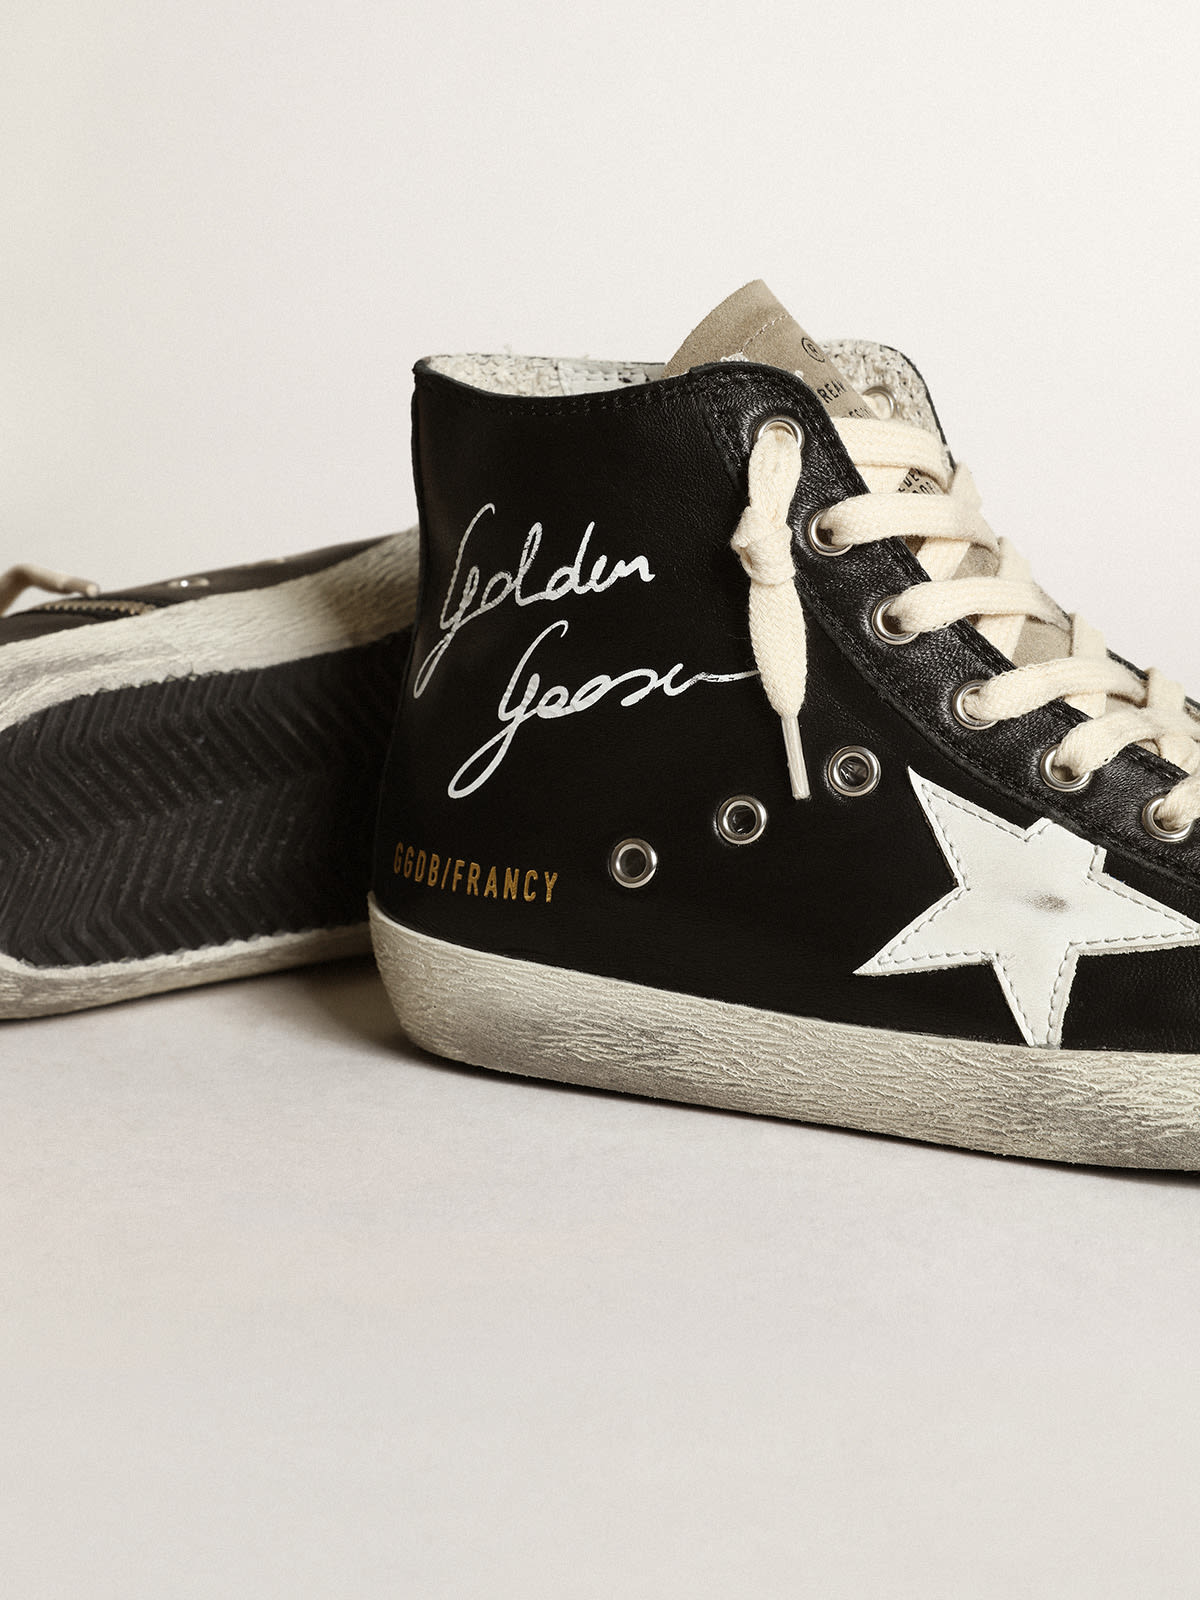 Golden Goose - Francy sneakers in black nappa leather with white leather star and dove-gray suede tongue in 